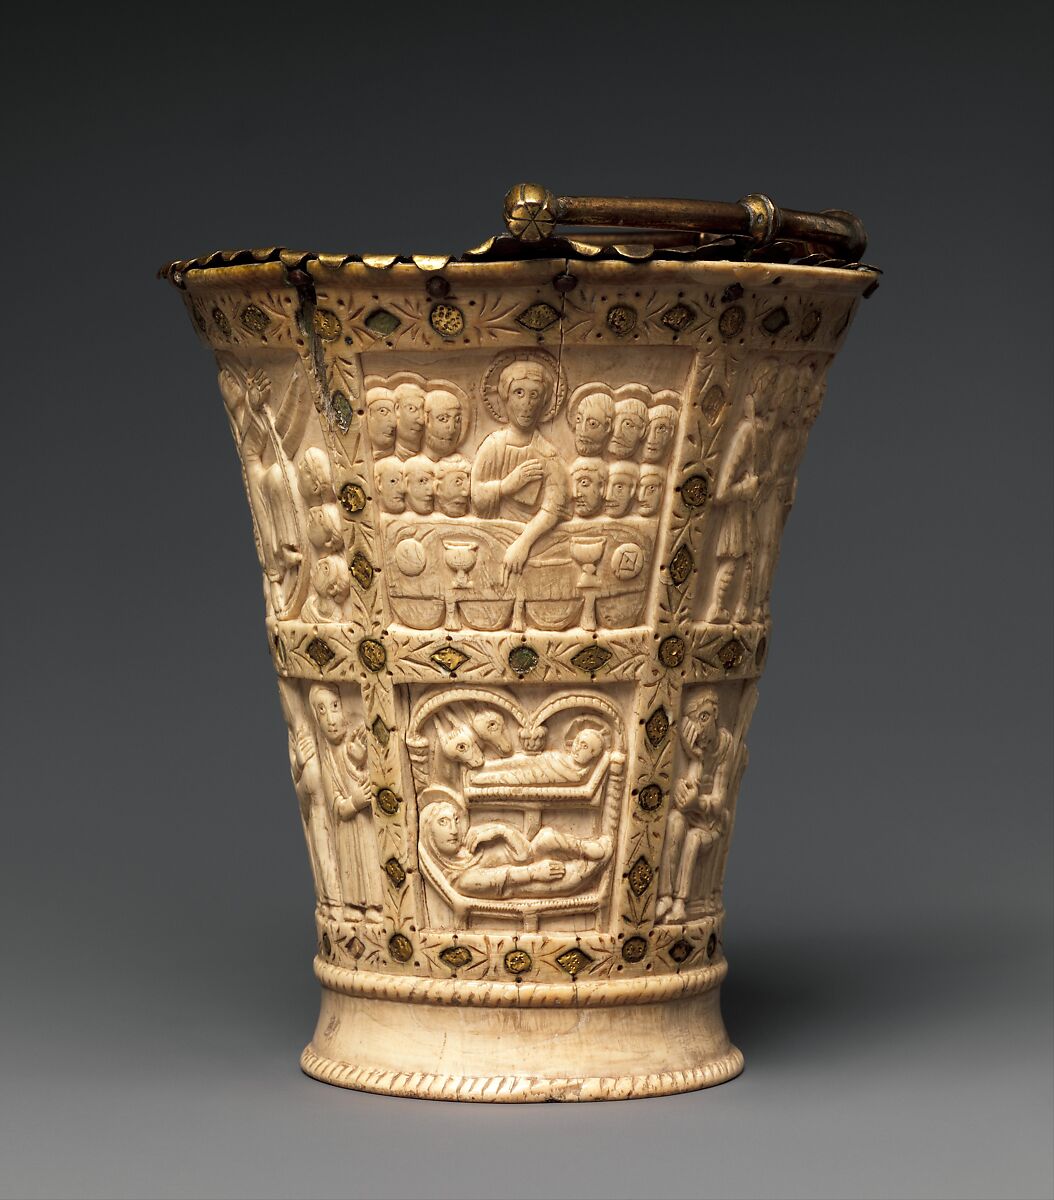 Situla (Bucket for Holy Water), Ivory with gilded copper-alloy mounts and foil inlays, Carolingian 